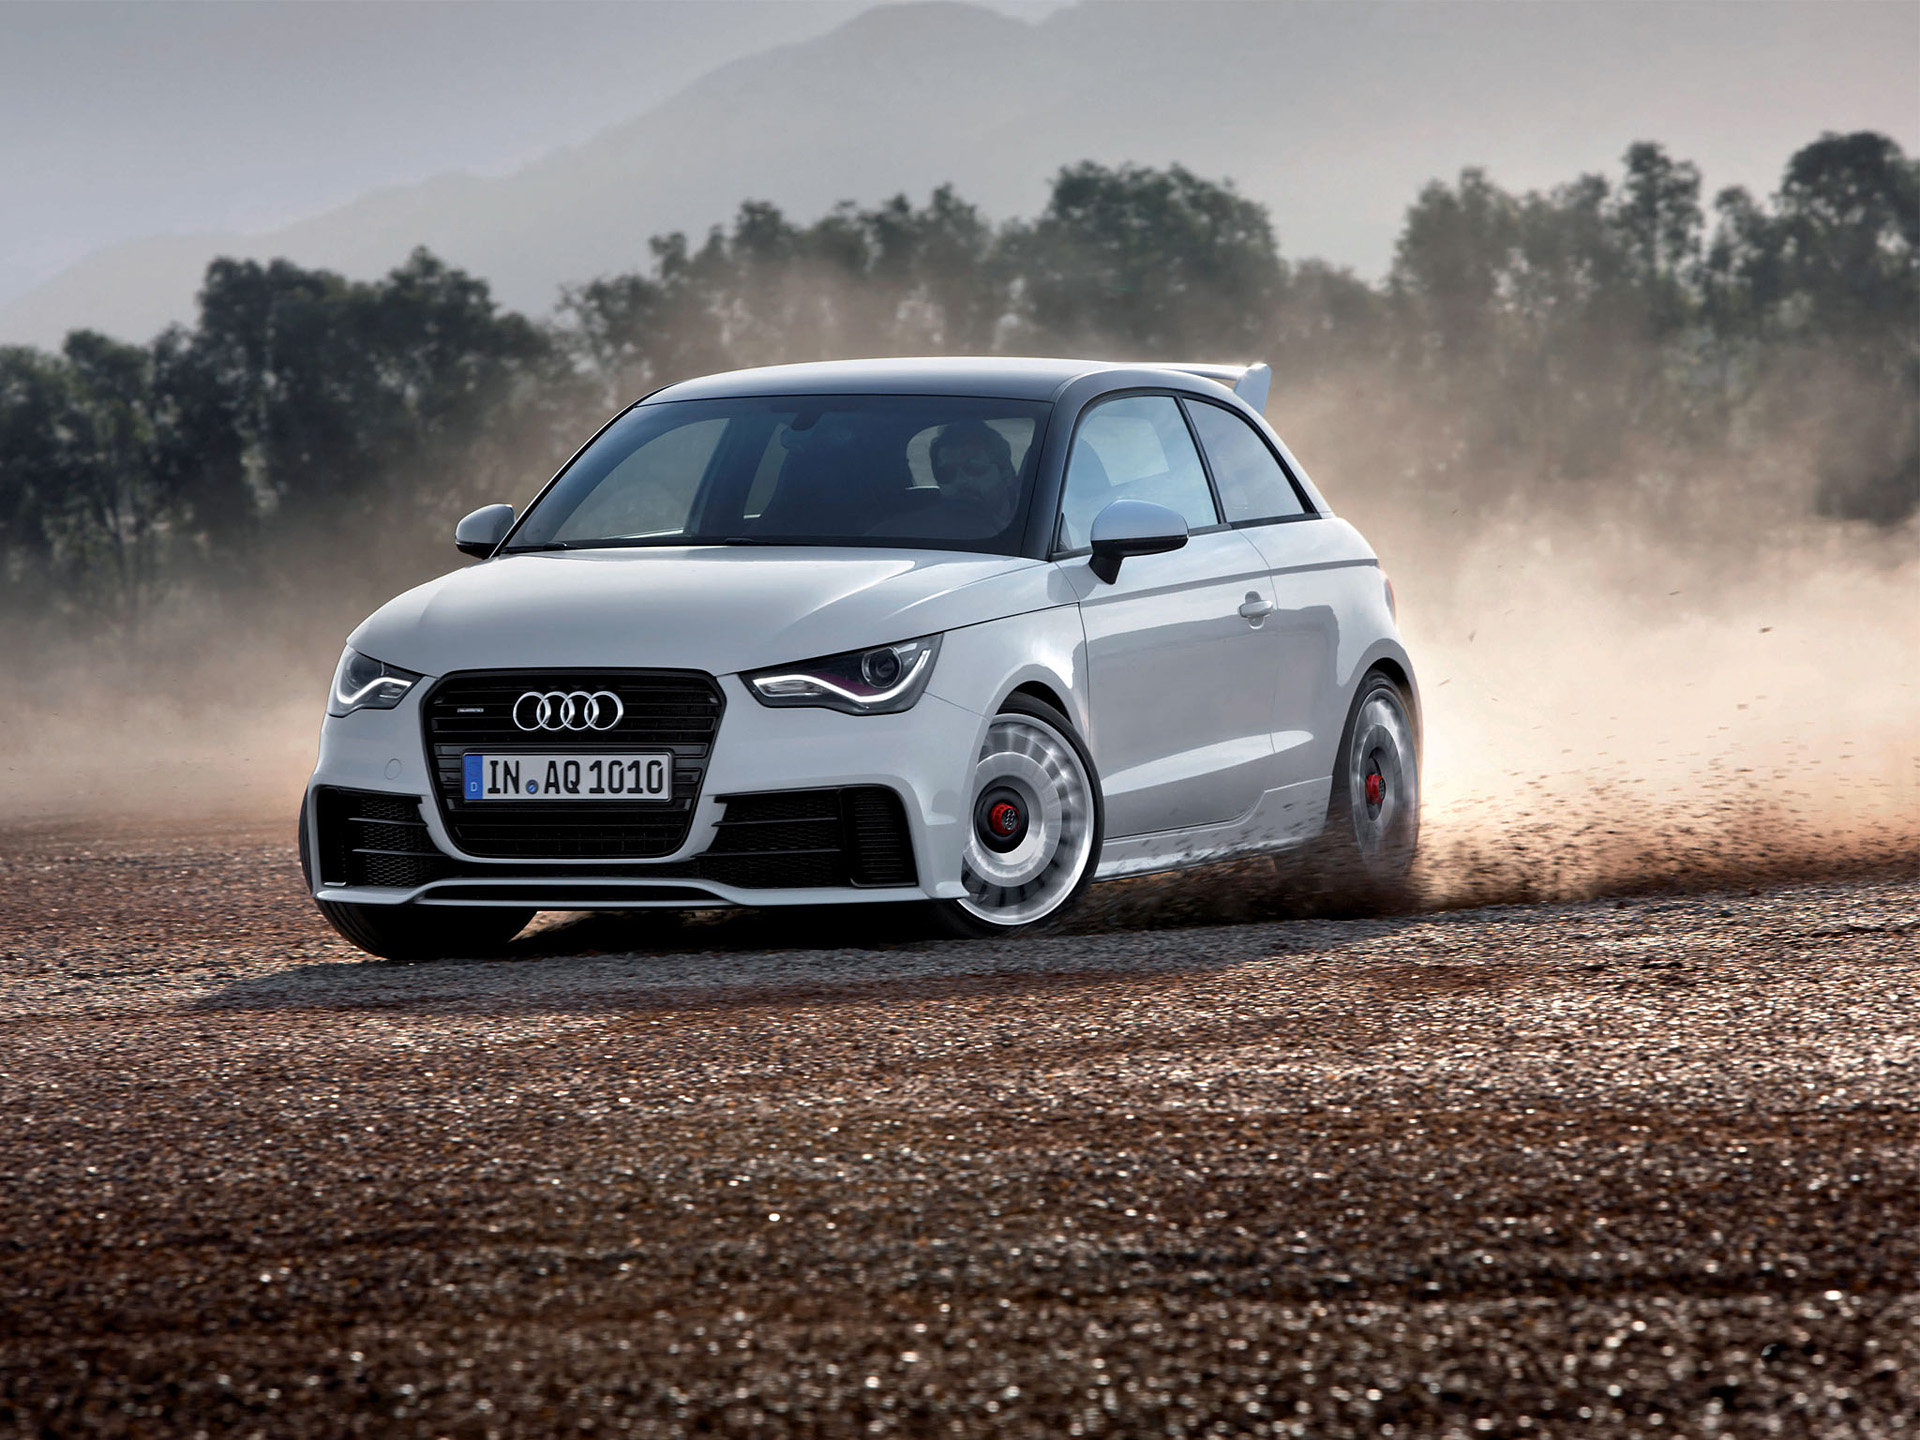 Audi A1 Wallpapers Hd For Desktop Backgrounds